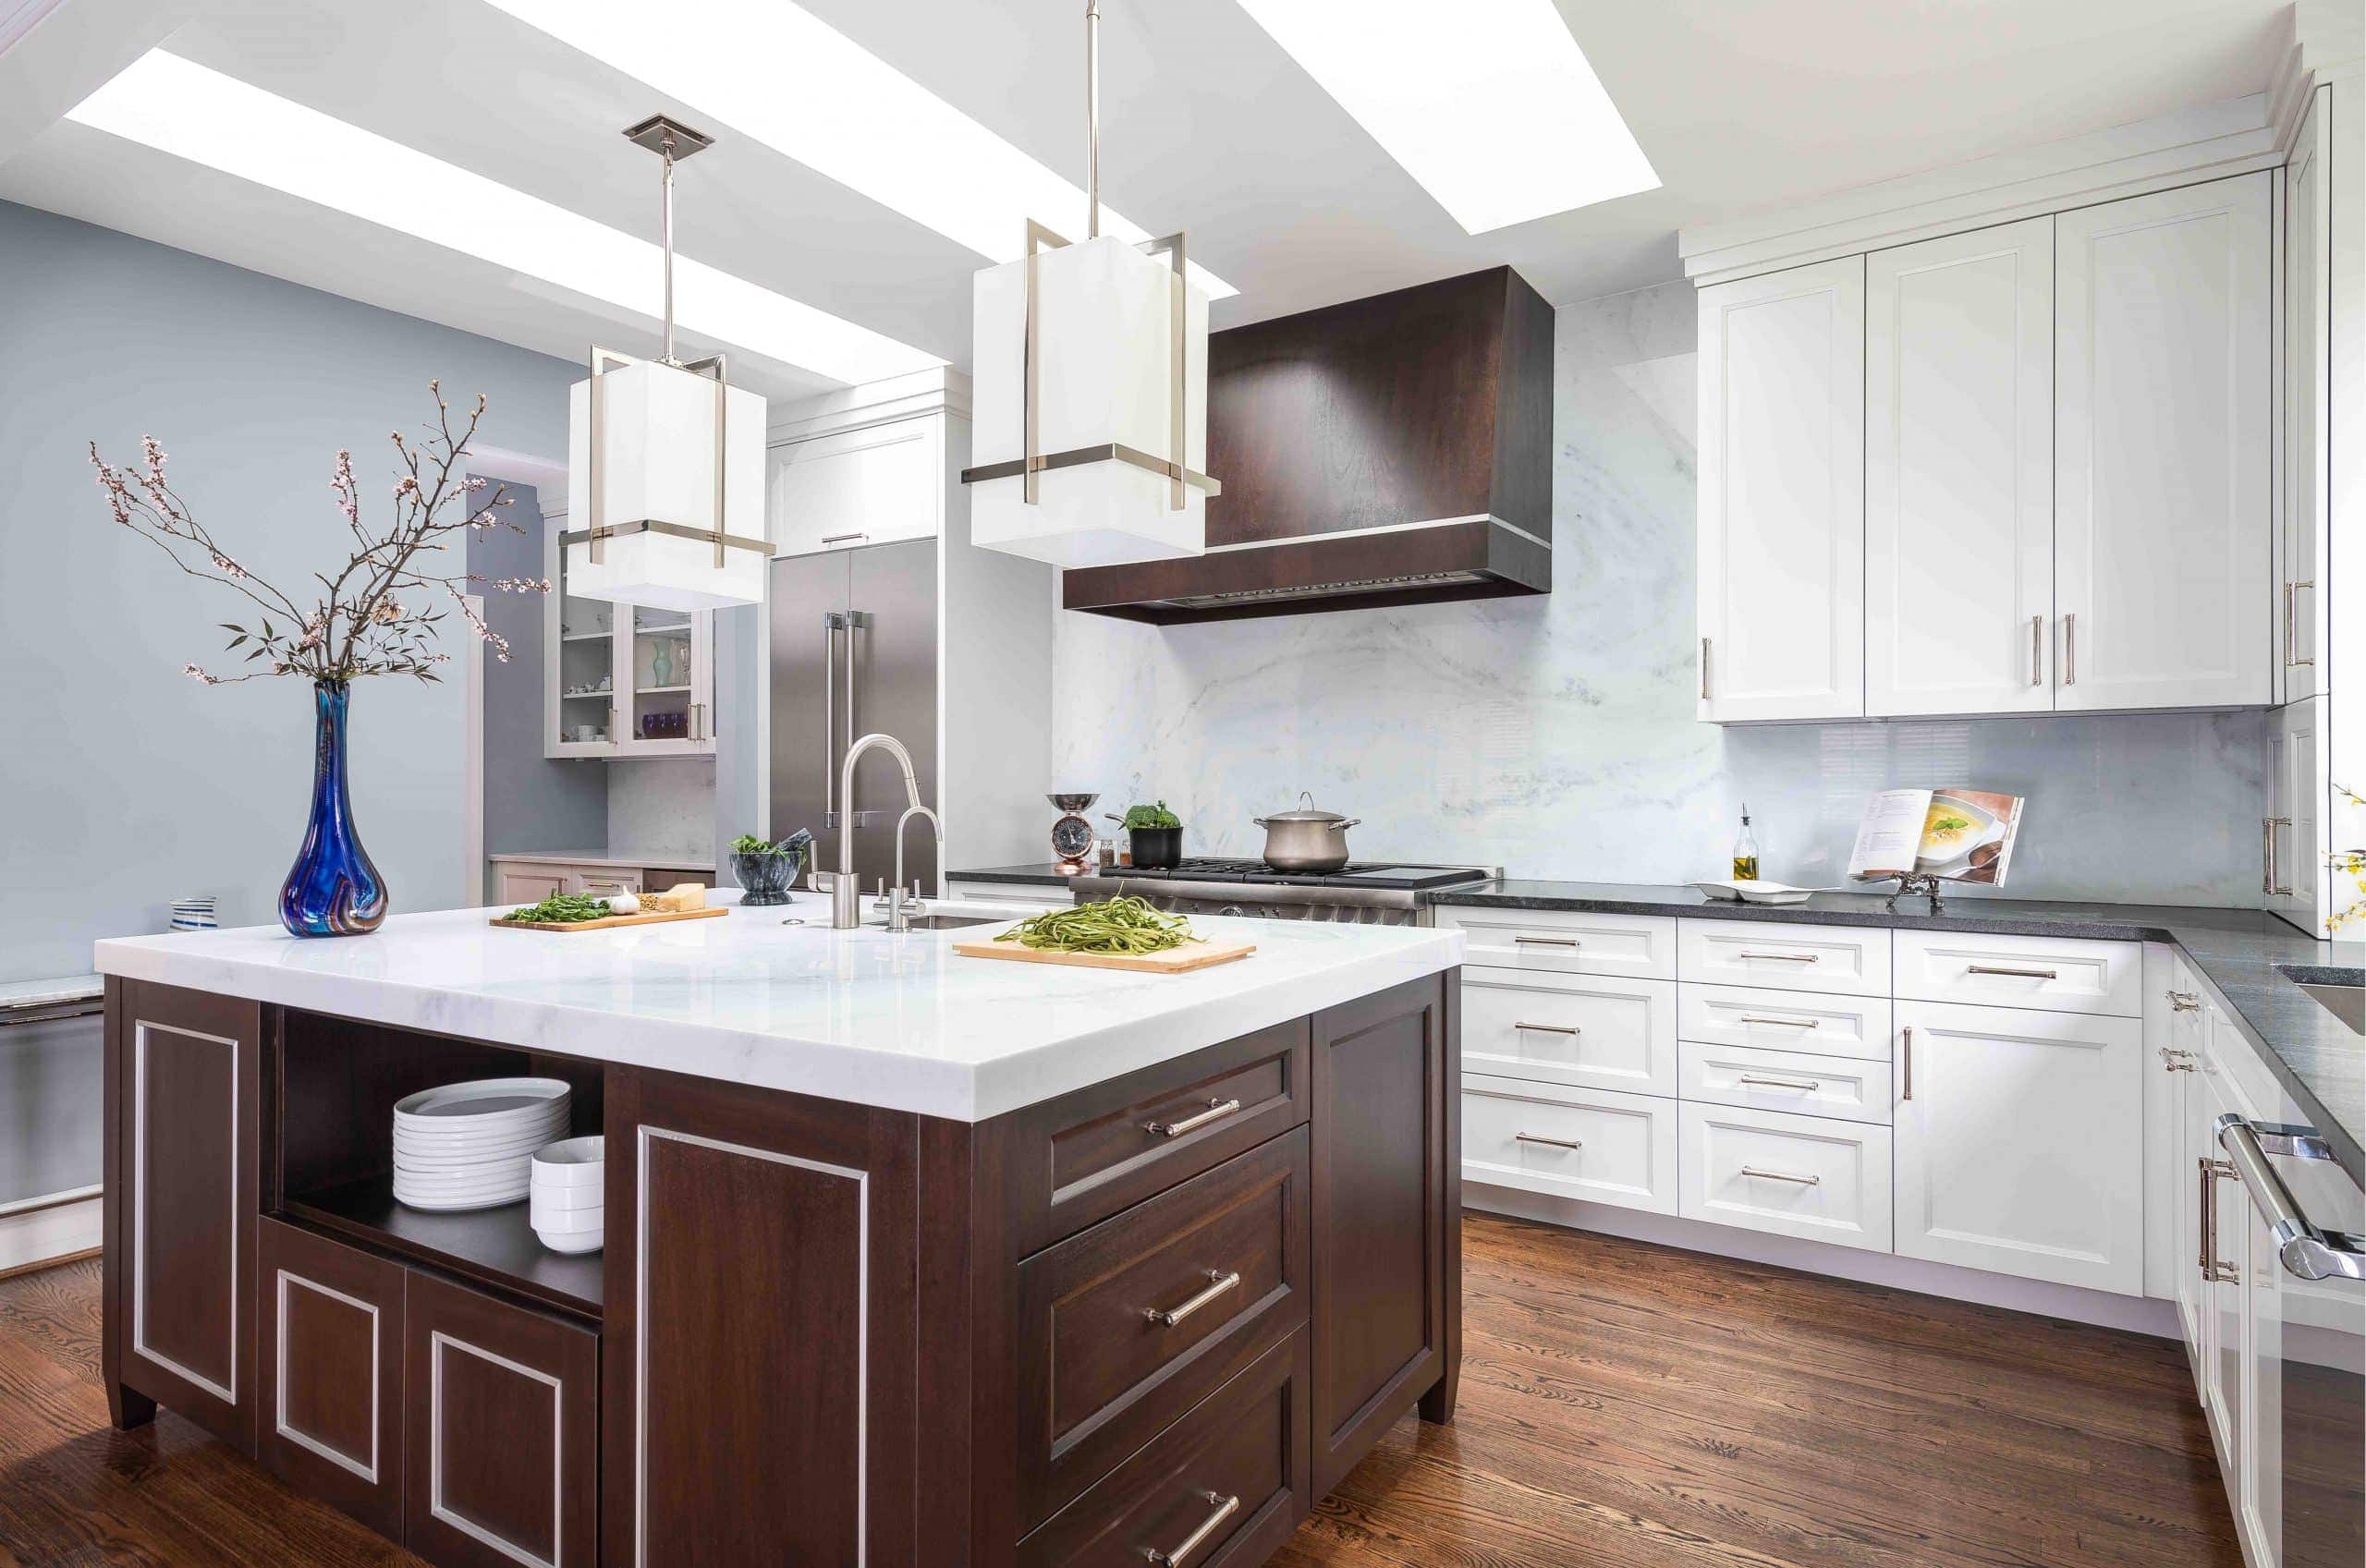 Work with the experts at Jennifer Gilmer Kitchen & Bath, Kitchen Remodeling in Alexandria, Virginia